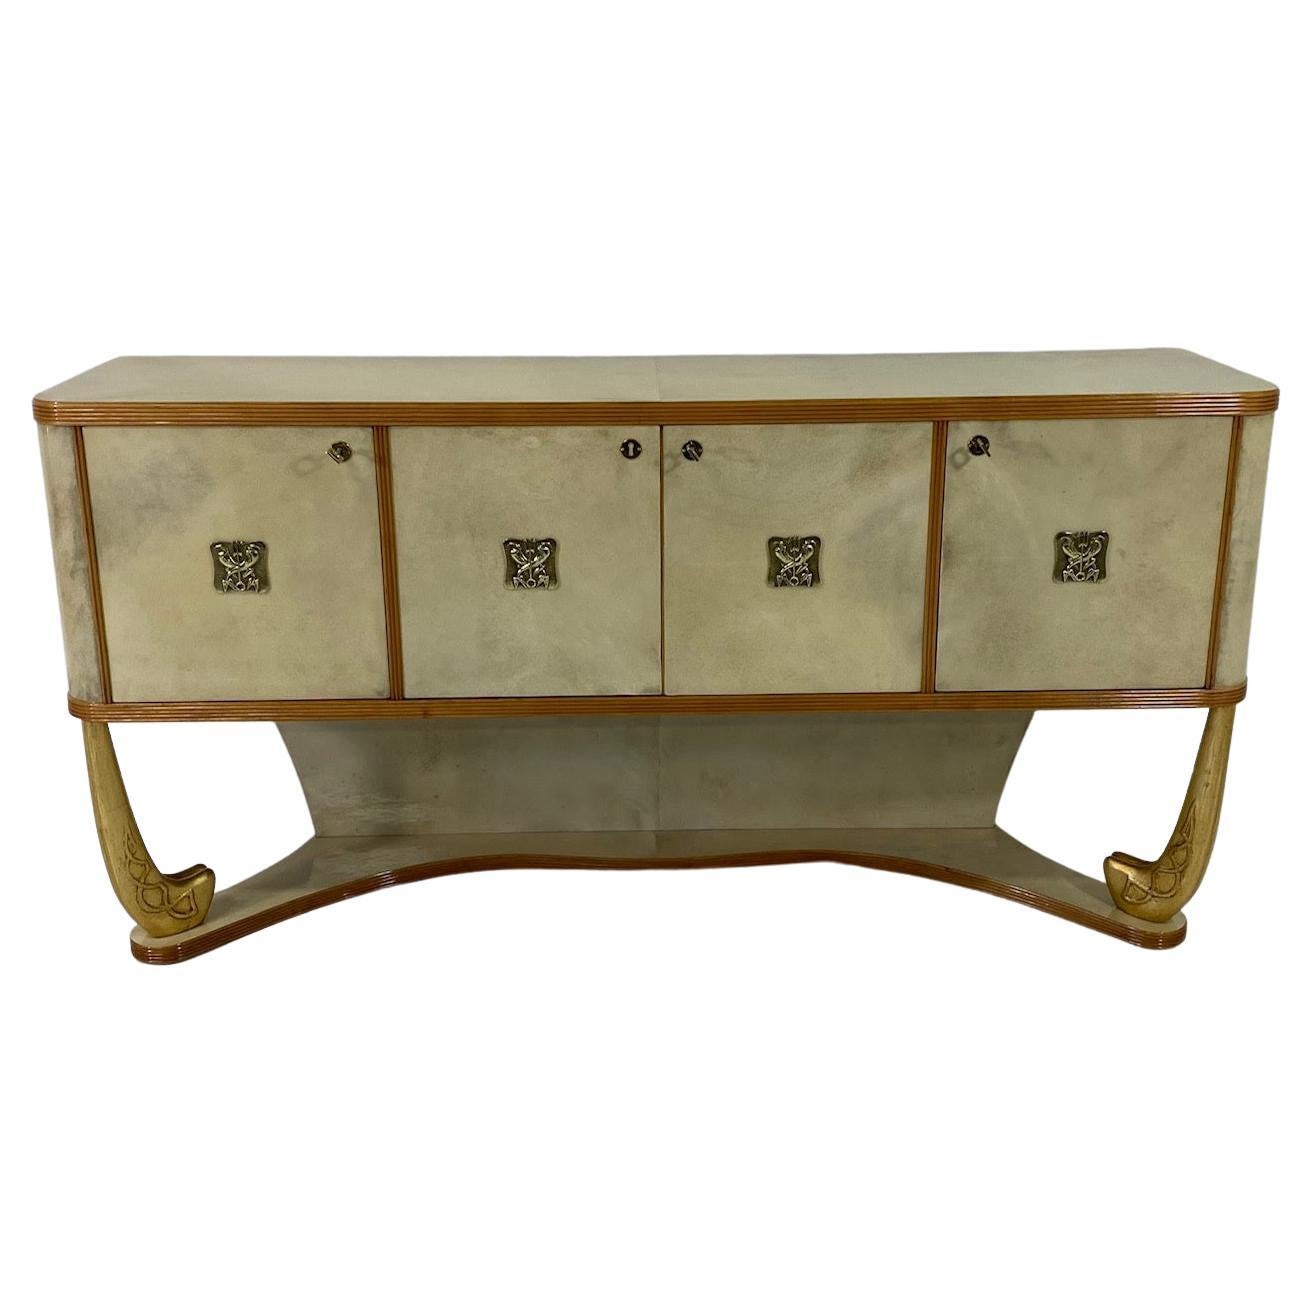 Italian Art Deco Parchment, Maple, Gold and Brass Sideboard, Attr. to Colli, 30s For Sale